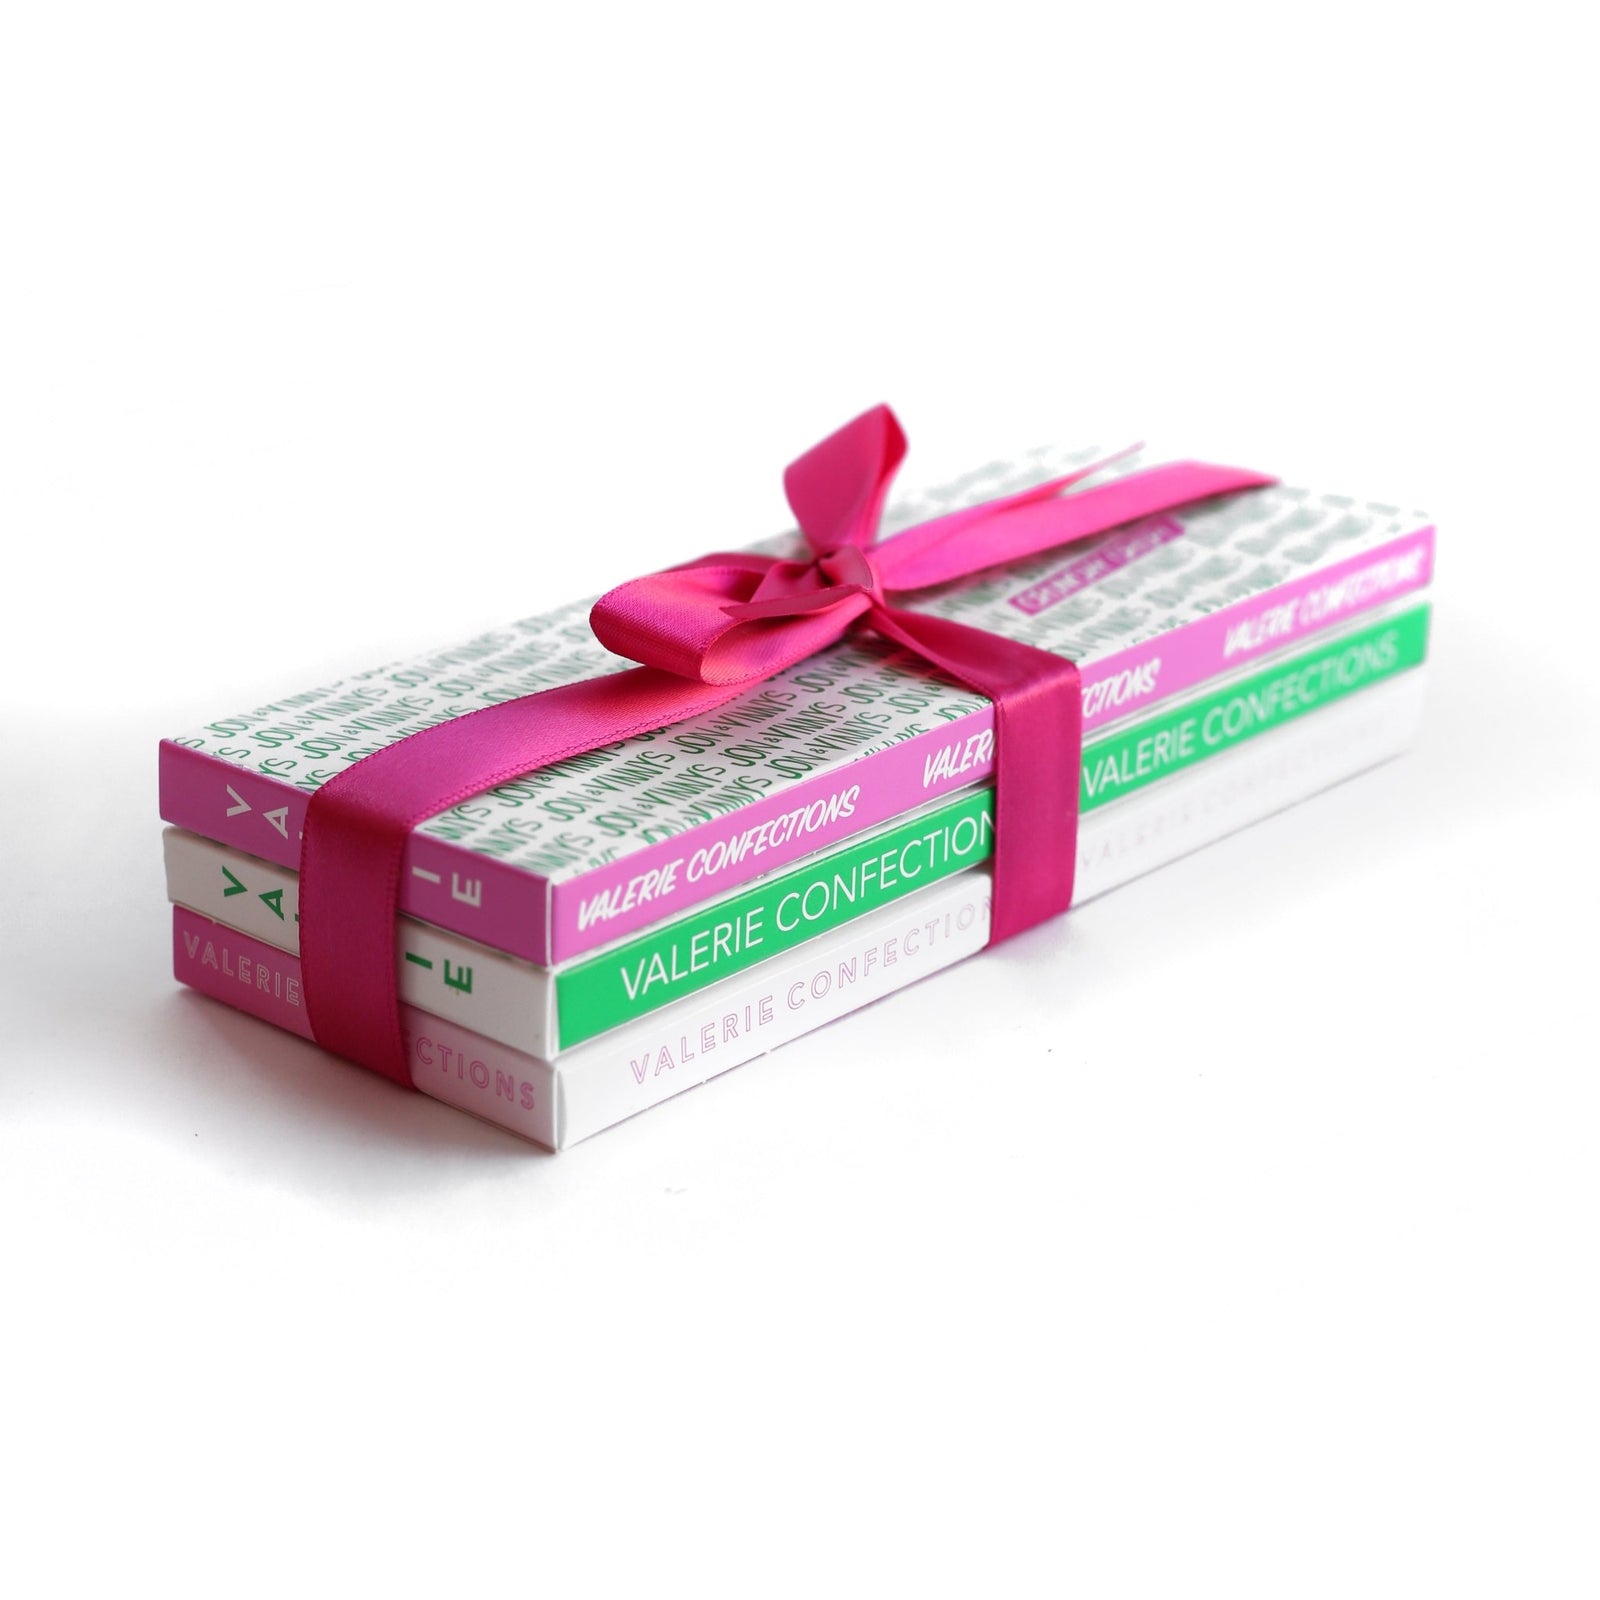 Stack of three Valerie Confections chocolate bars tied with a pink ribbon.